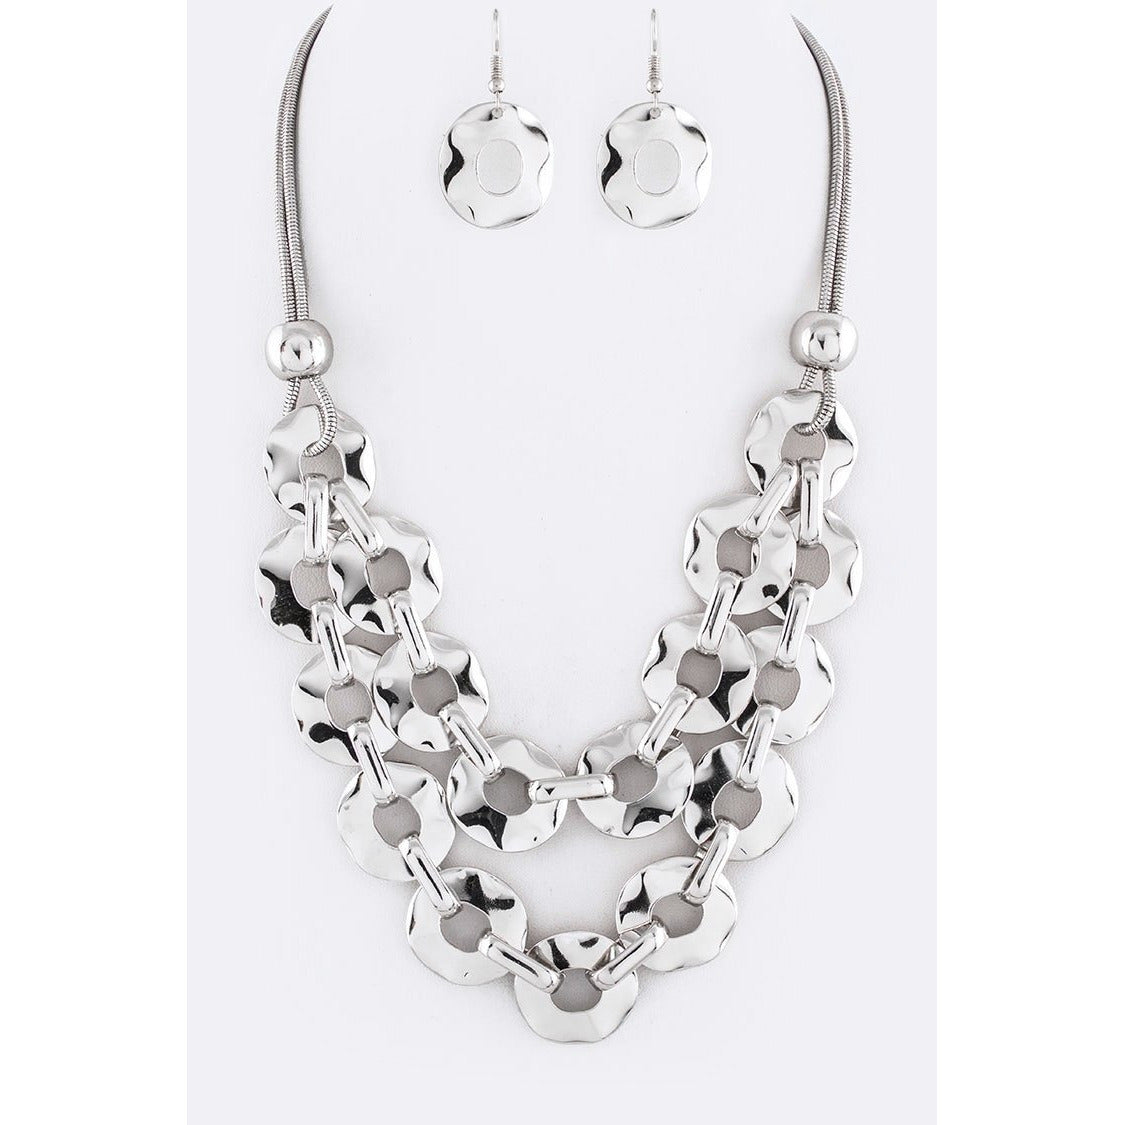 Honeycomb Chain Bib Necklace Set (Silver) - Ariya's Apparel and Accessories